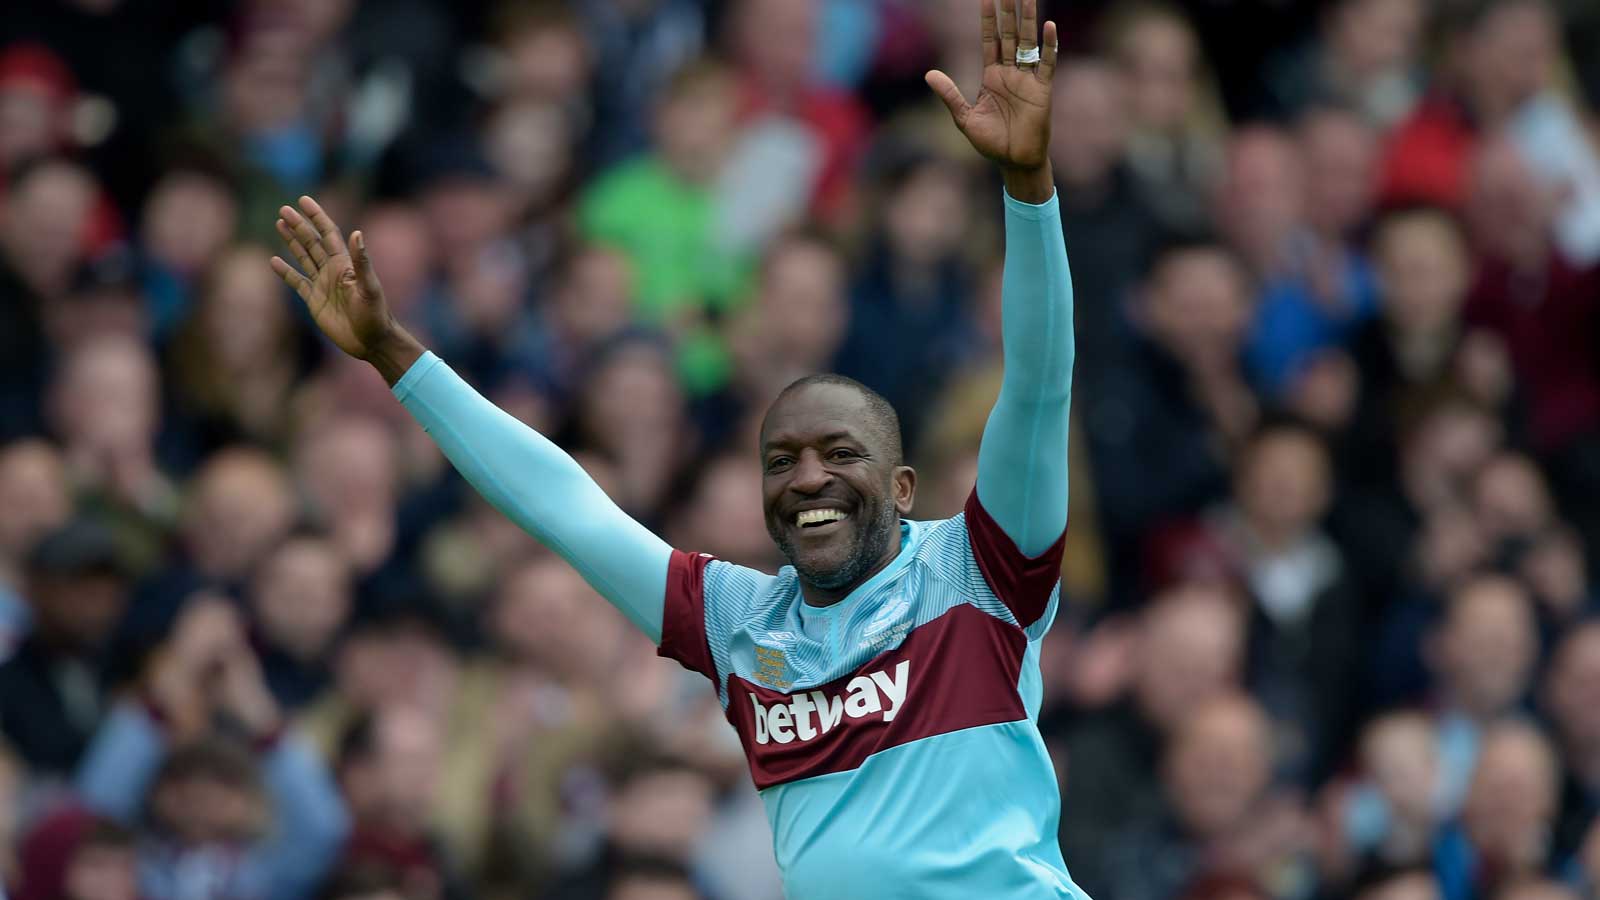 Chris Powell playing in Mark Noble's Testimonial